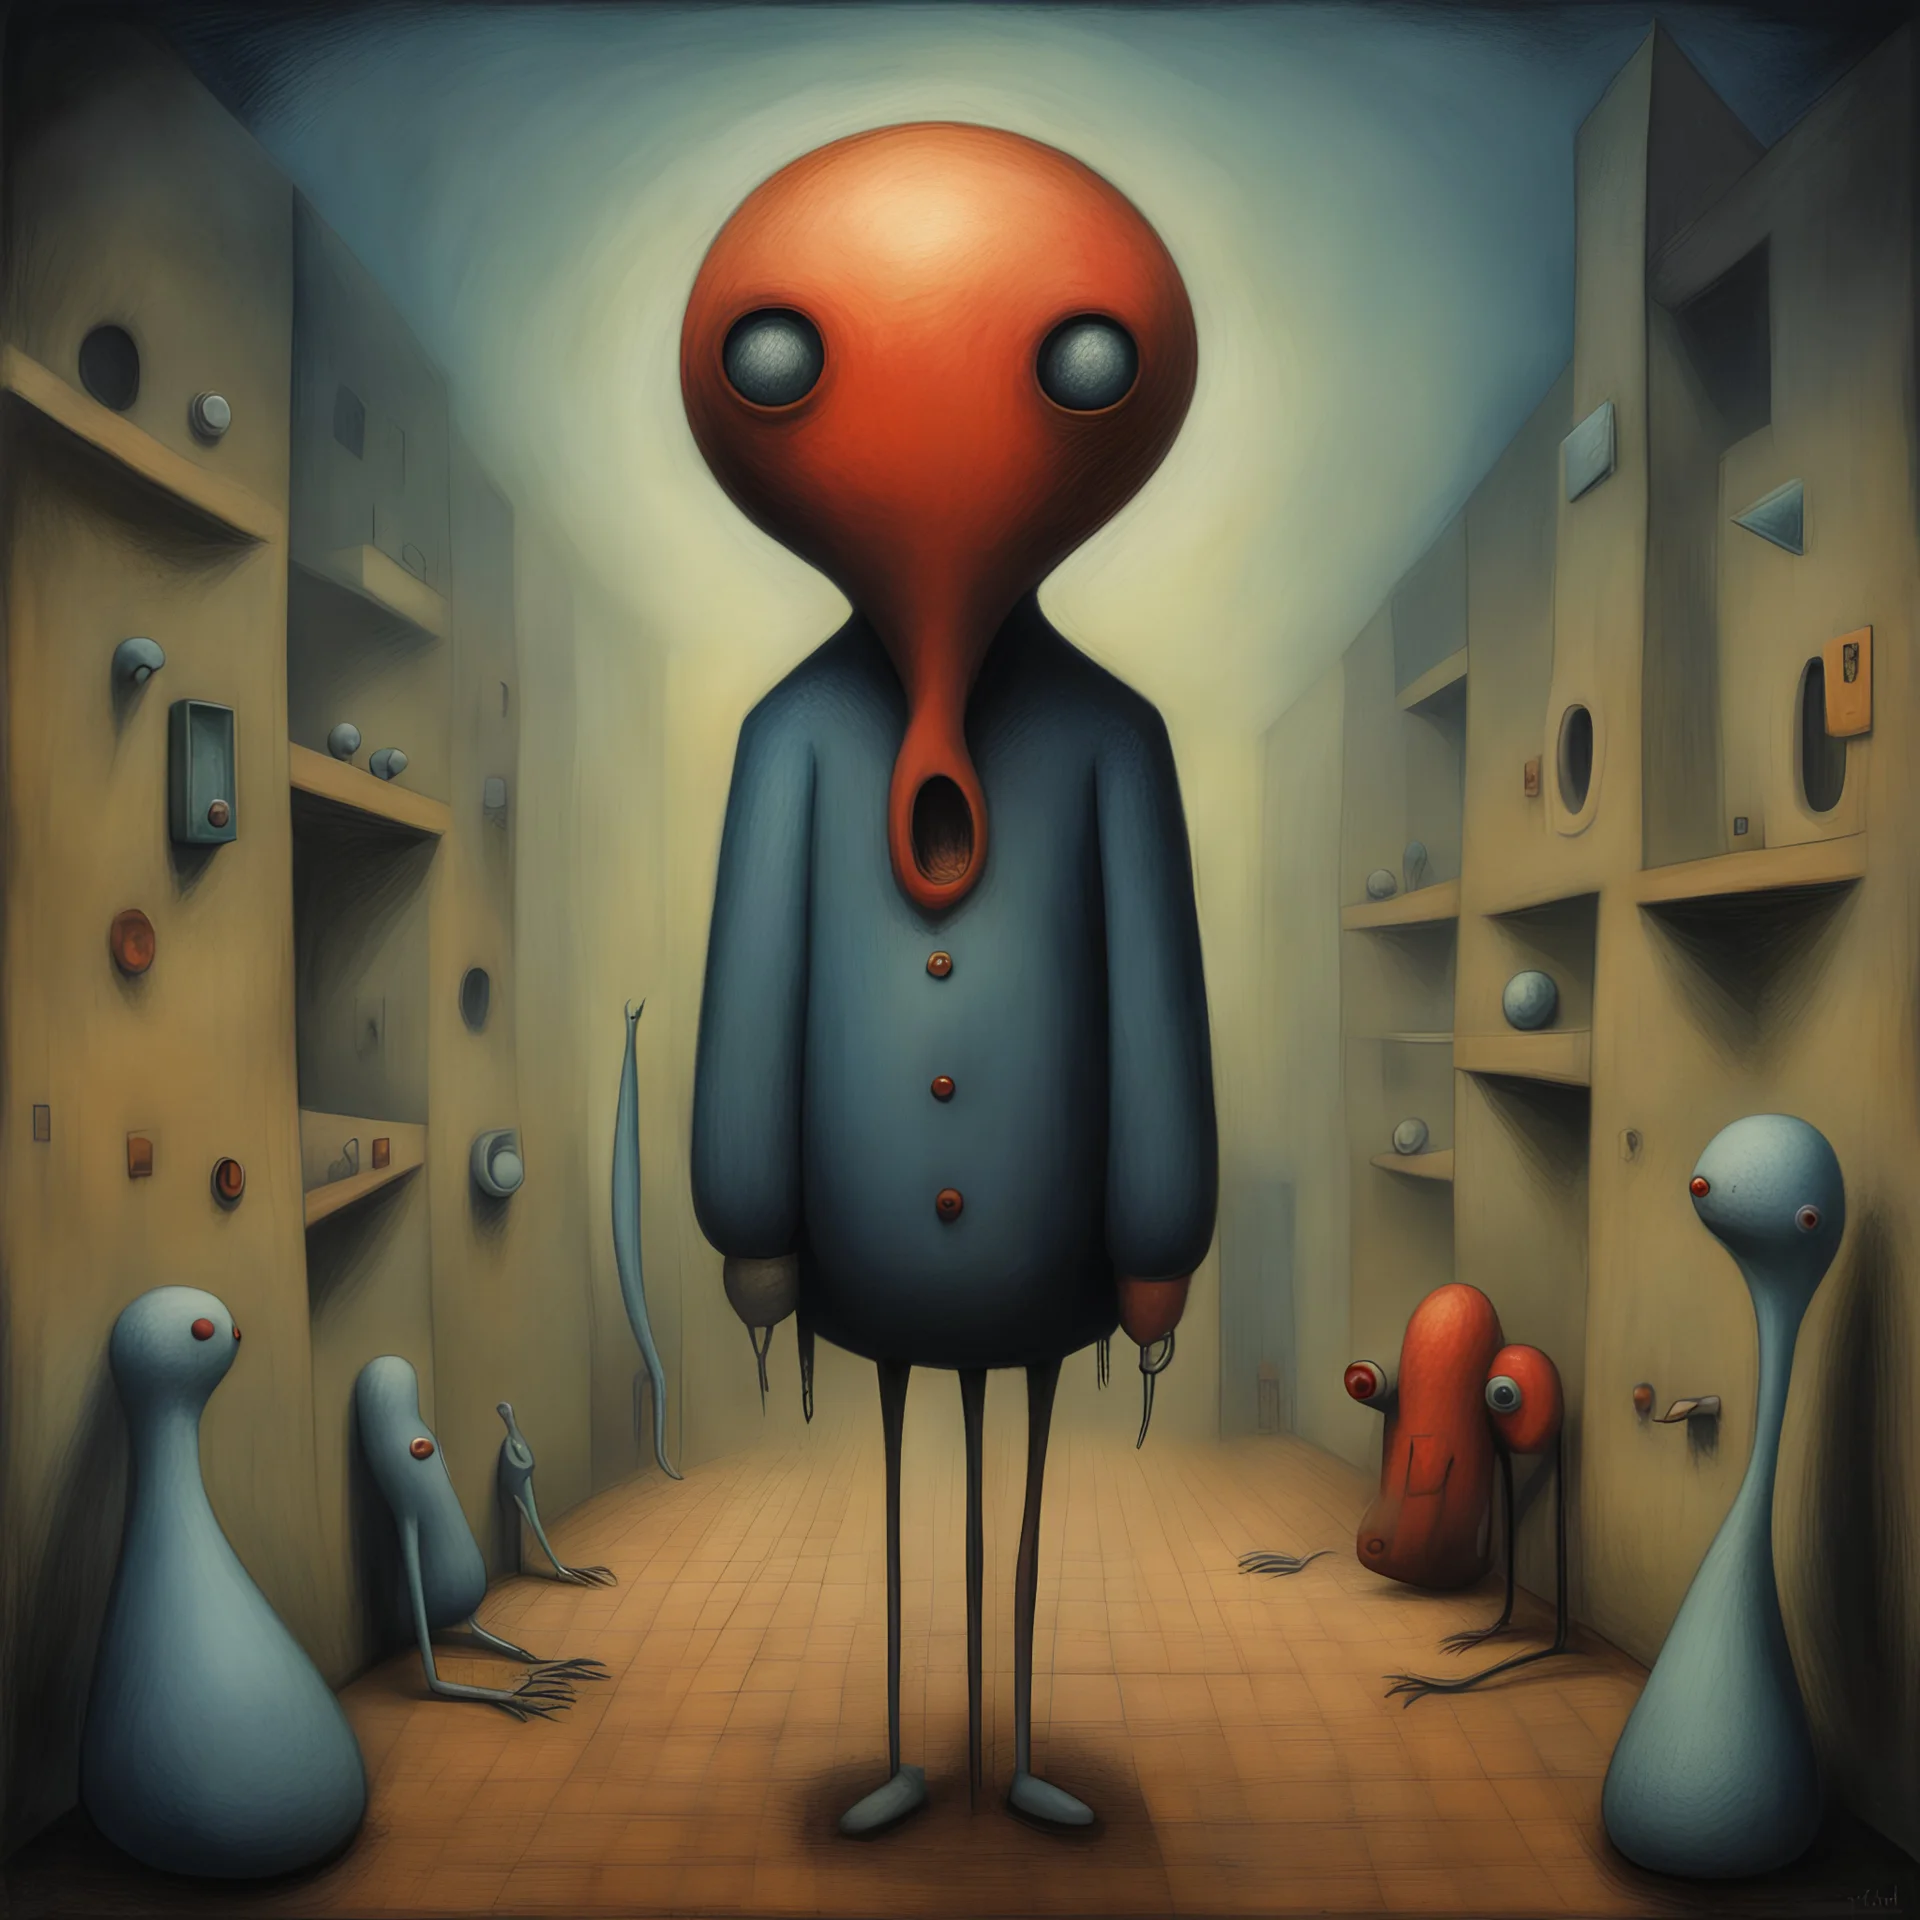 surreal abstract art, paranoid multi-level deep-seated fear of being alone, metaphoric sinister anthropomorphic interconnected weirdlings, weirdcore, unsettling, by Matt Mahurin and Pawel Kuczynski and Joan Miro and Ben Templesmith